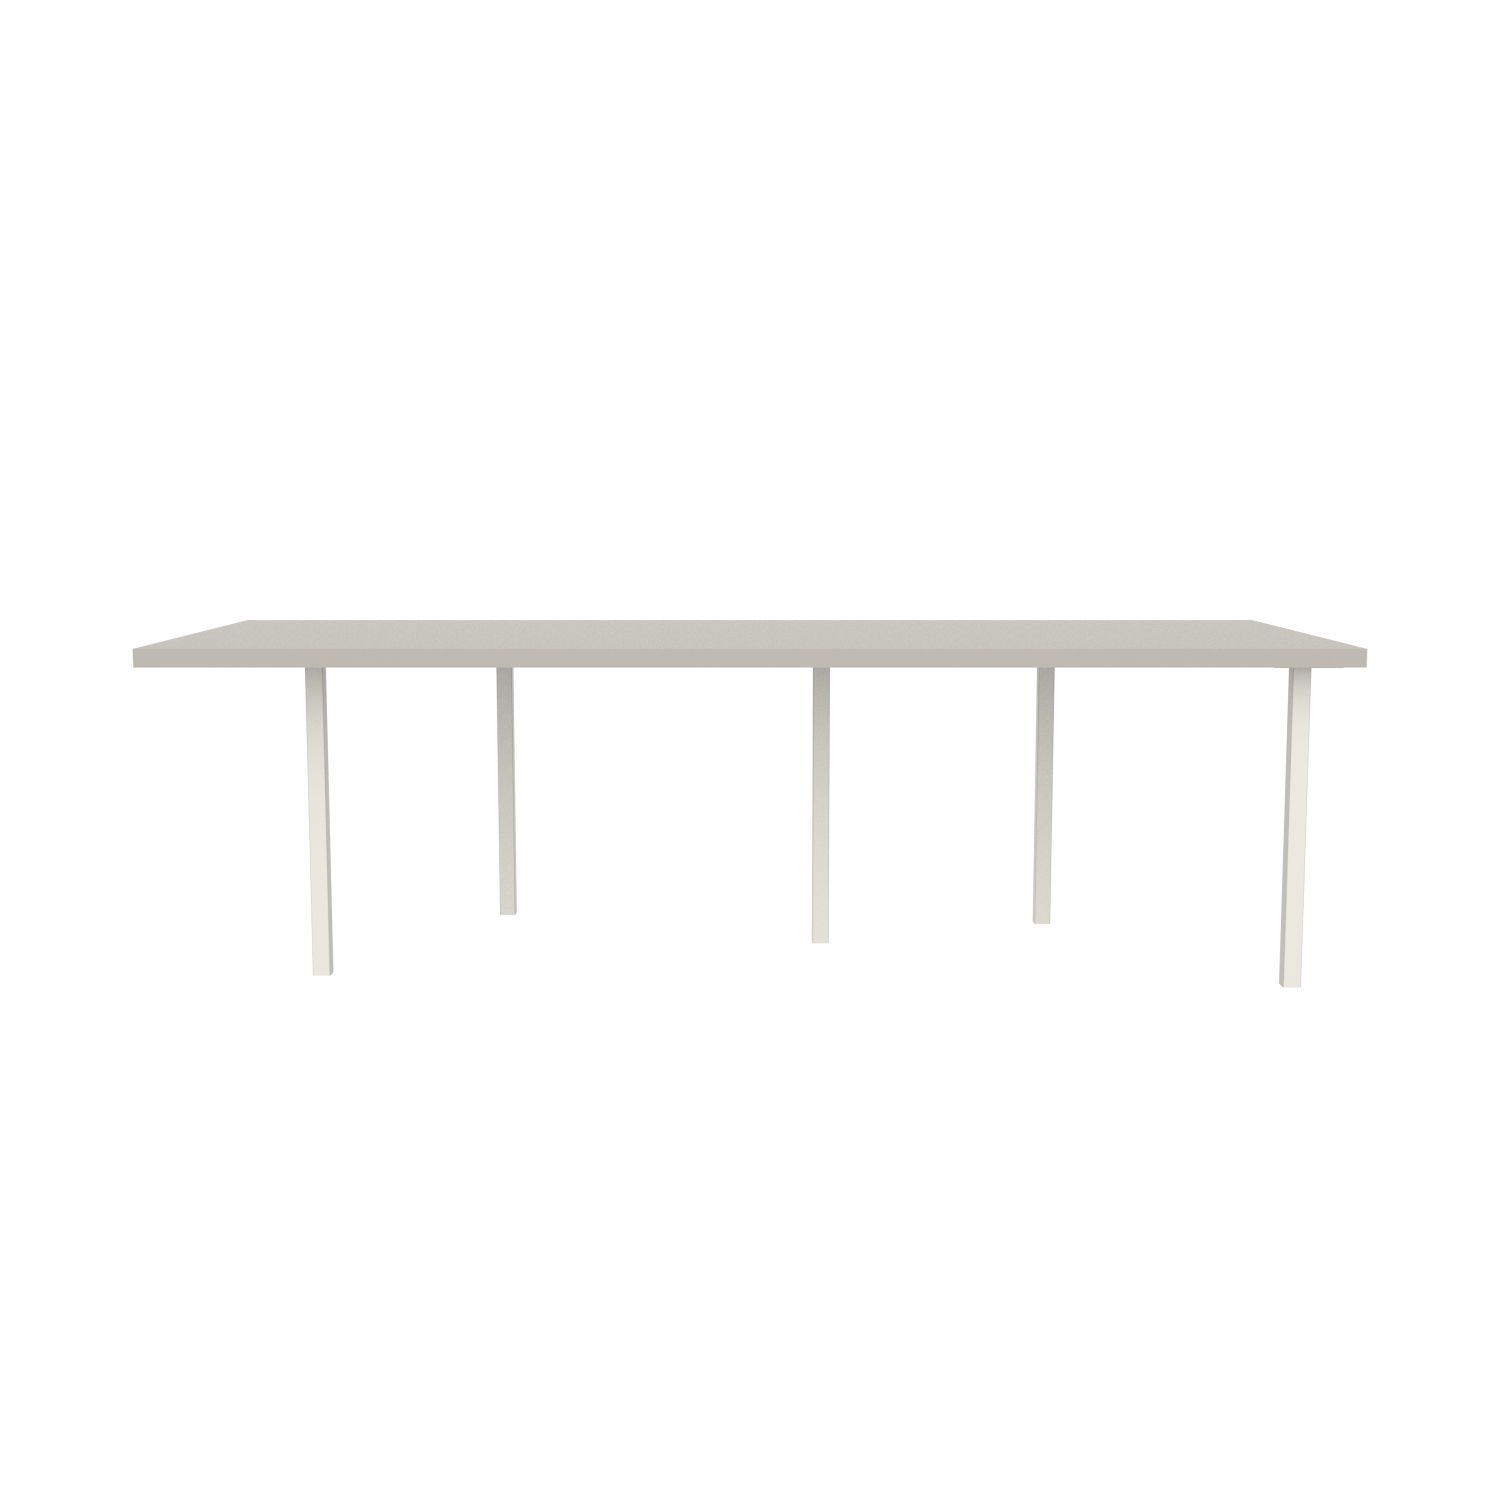 lensvelt bbrand table five fixed heigt 103x264 hpl white 50 mm price level 1 white ral9010